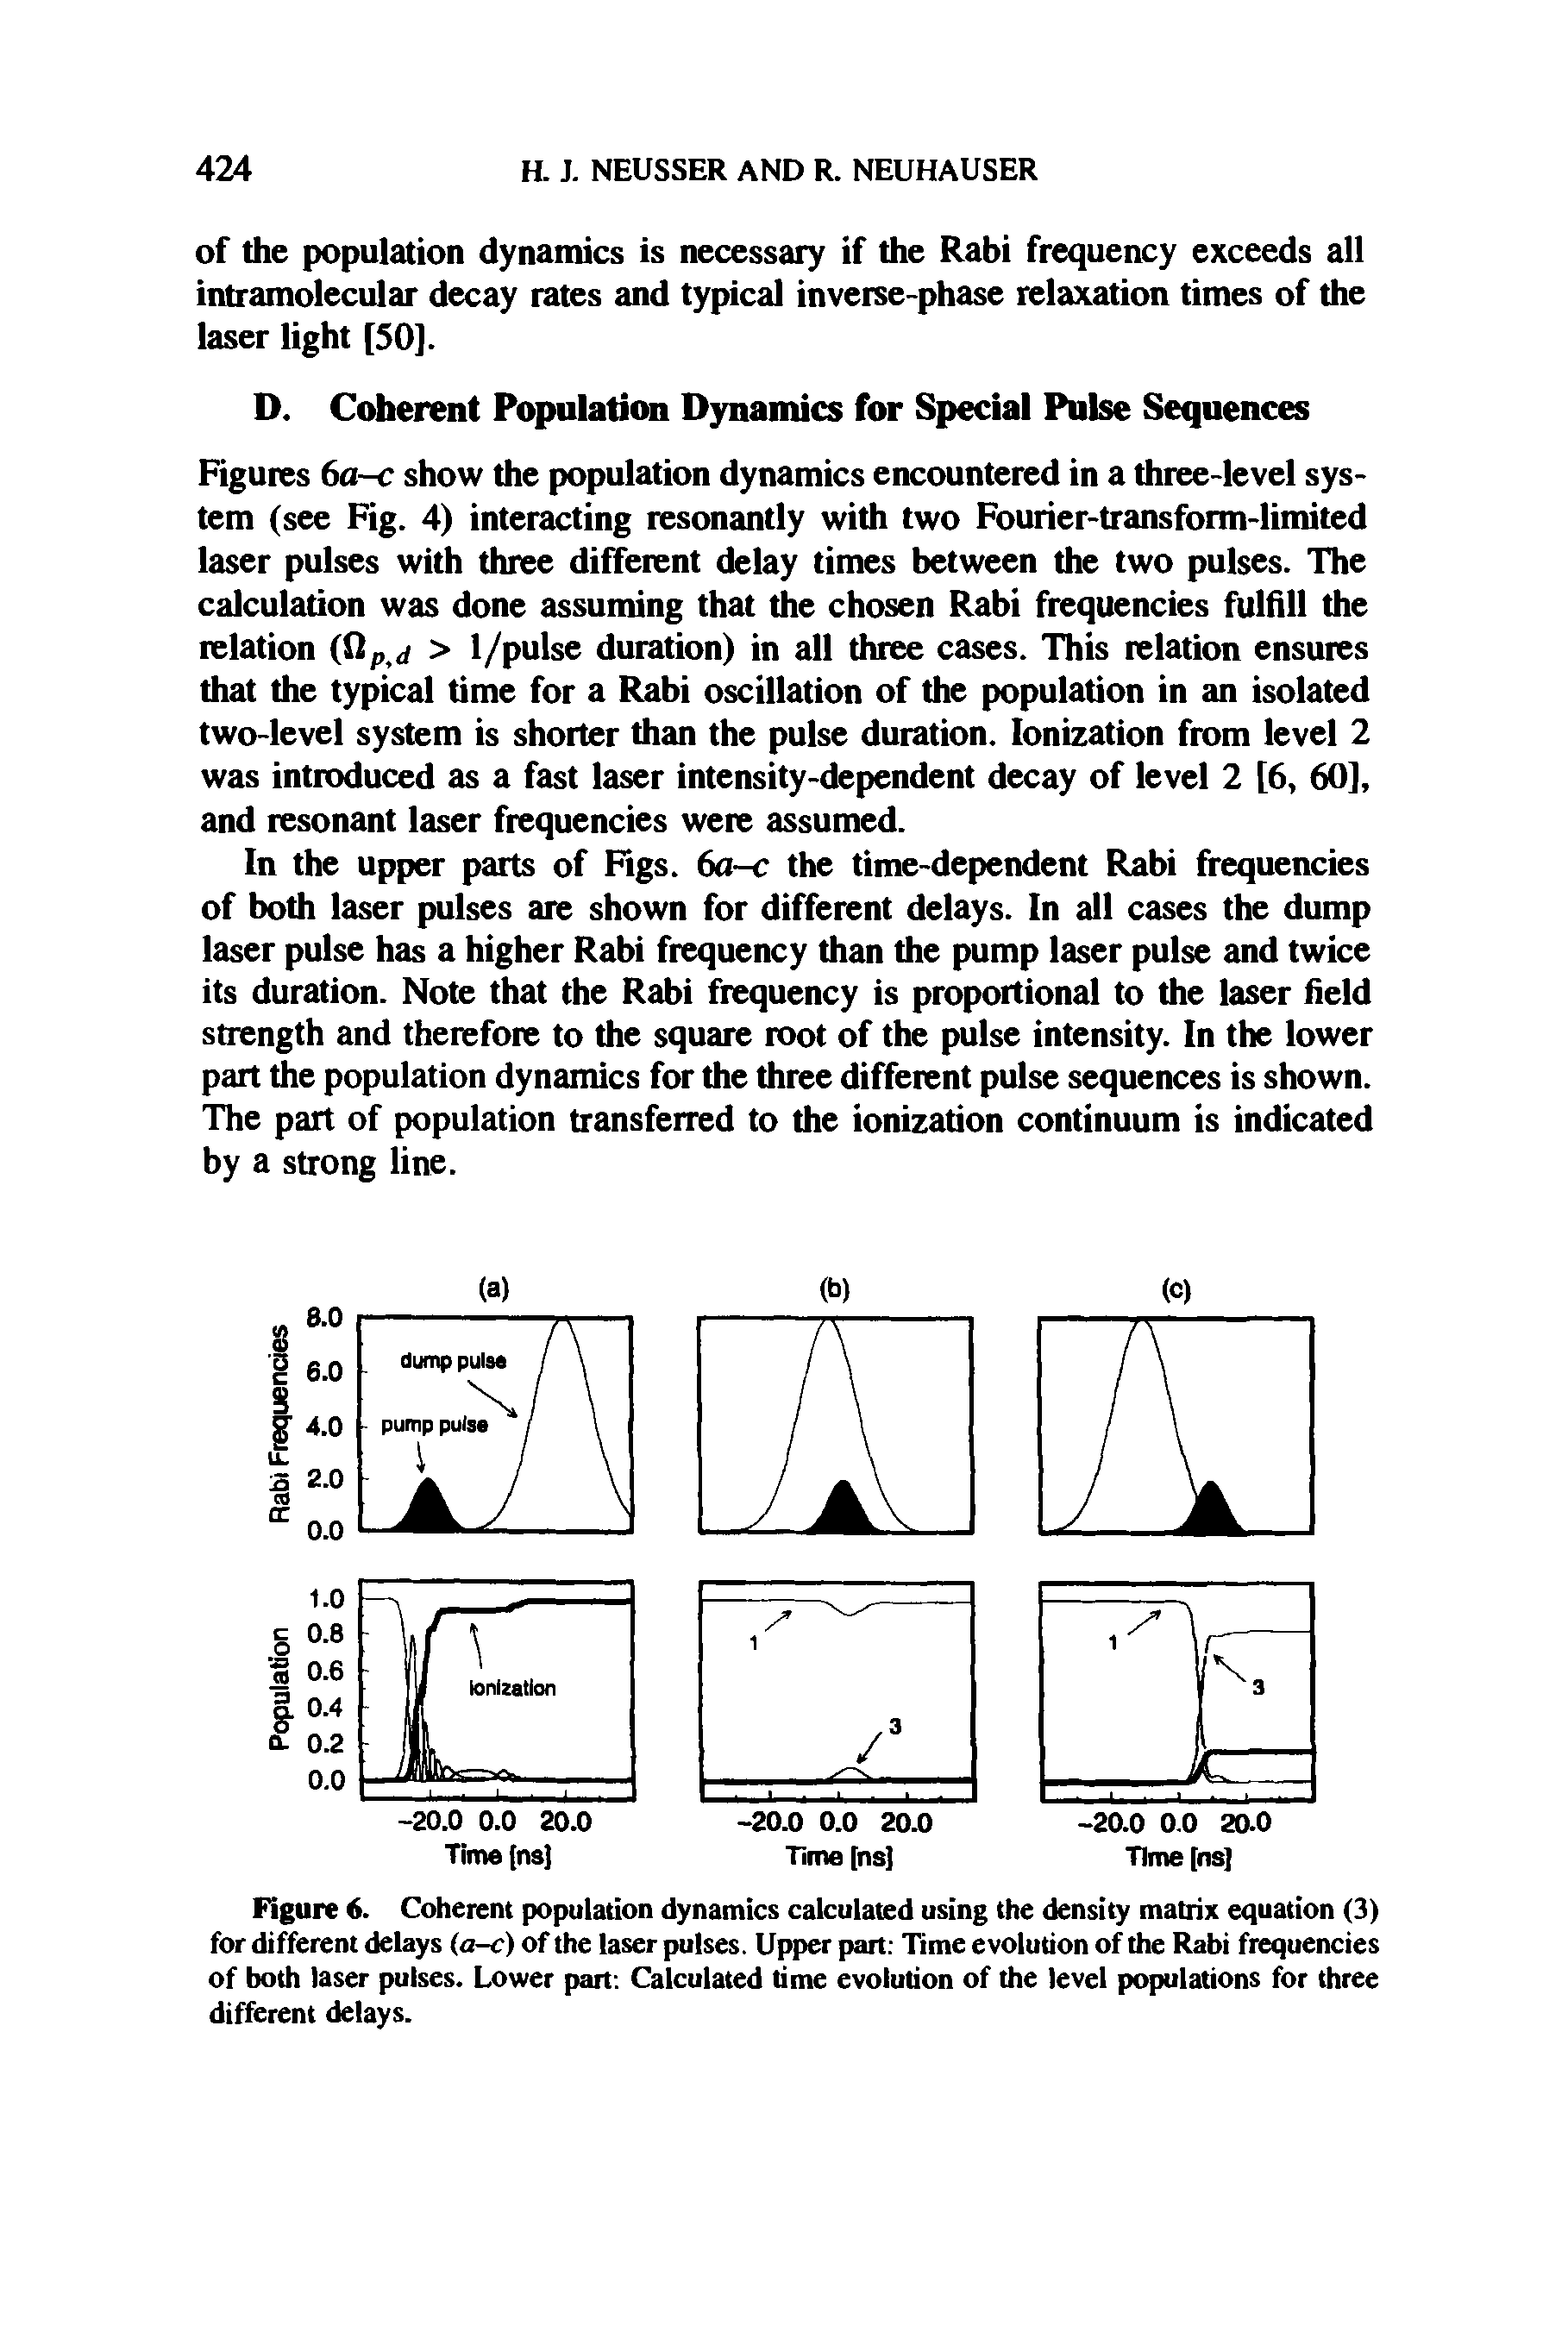 Figures 6a-c show the population dynamics encountered in a three-level system (see Fig. 4) interacting resonantly with two Fourier-transform-limited laser pulses with three different delay times between the two pulses. The calculation was done assuming that the chosen Rabi frequencies fulfill the relation > 1/pulse duration) in all three cases. This relation ensures that the typical time for a Rabi oscillation of the population in an isolated two-level system is shorter than the pulse duration. Ionization from level 2 was introduced as a fast laser intensity-dependent decay of level 2 [6, 60], and resonant laser frequencies were assumed.